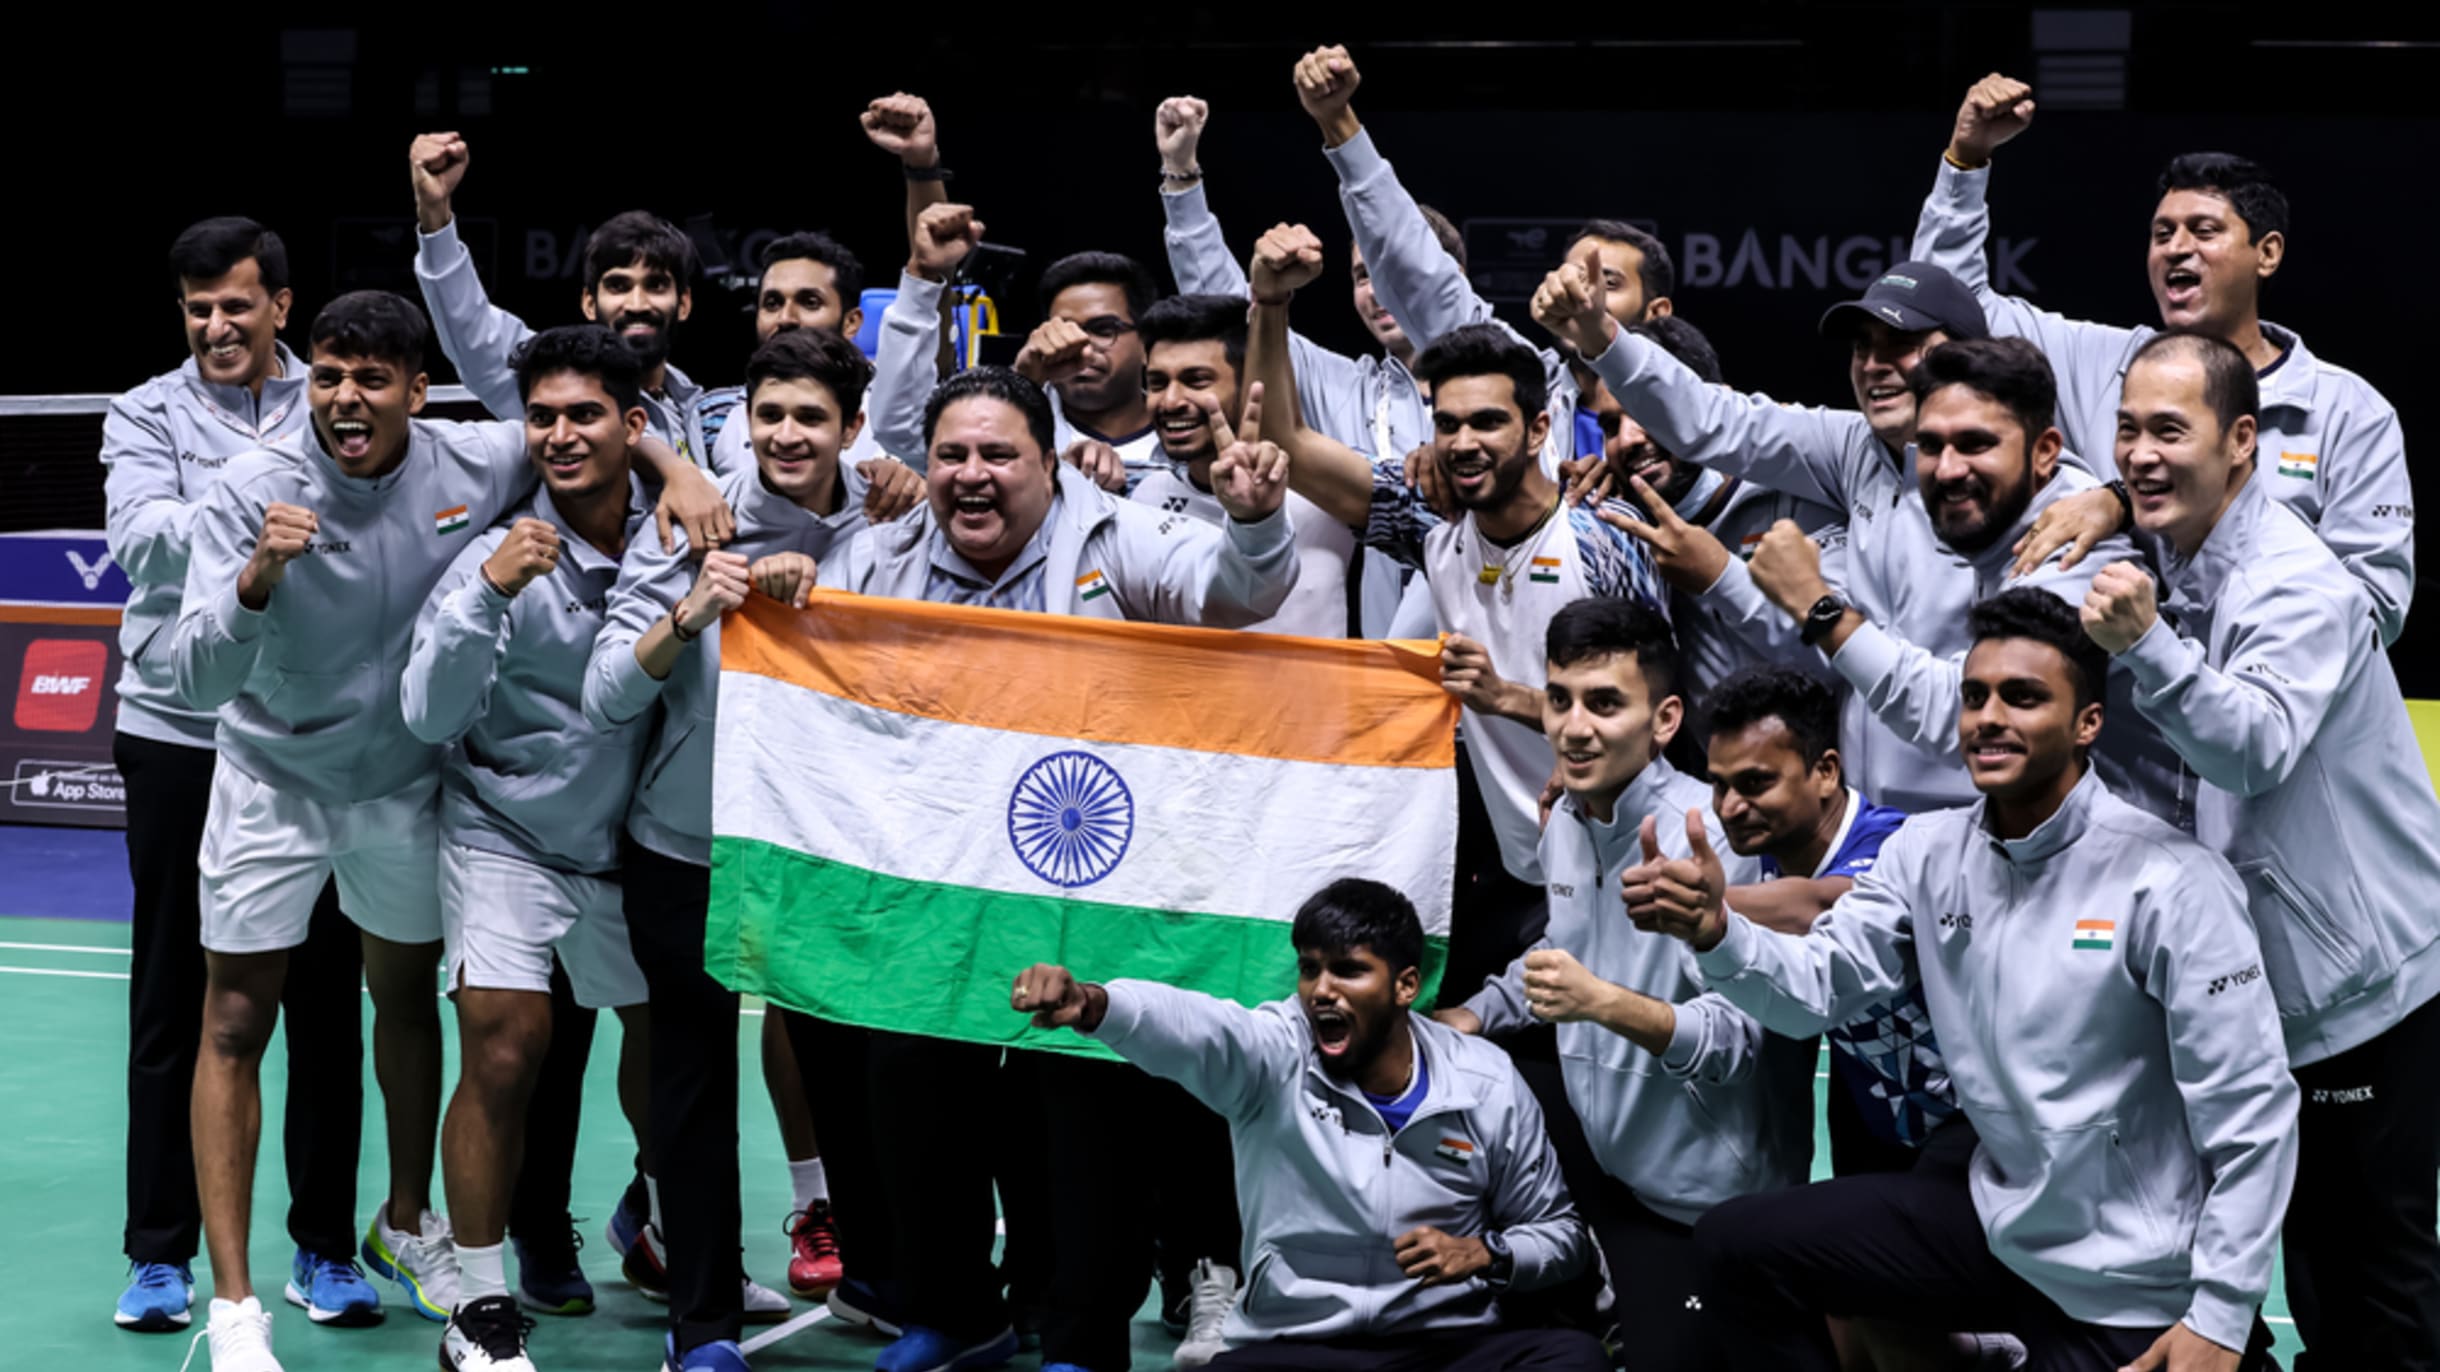 Thomas Cup 2022 badminton final India vs Indonesia, watch live streaming and telecast